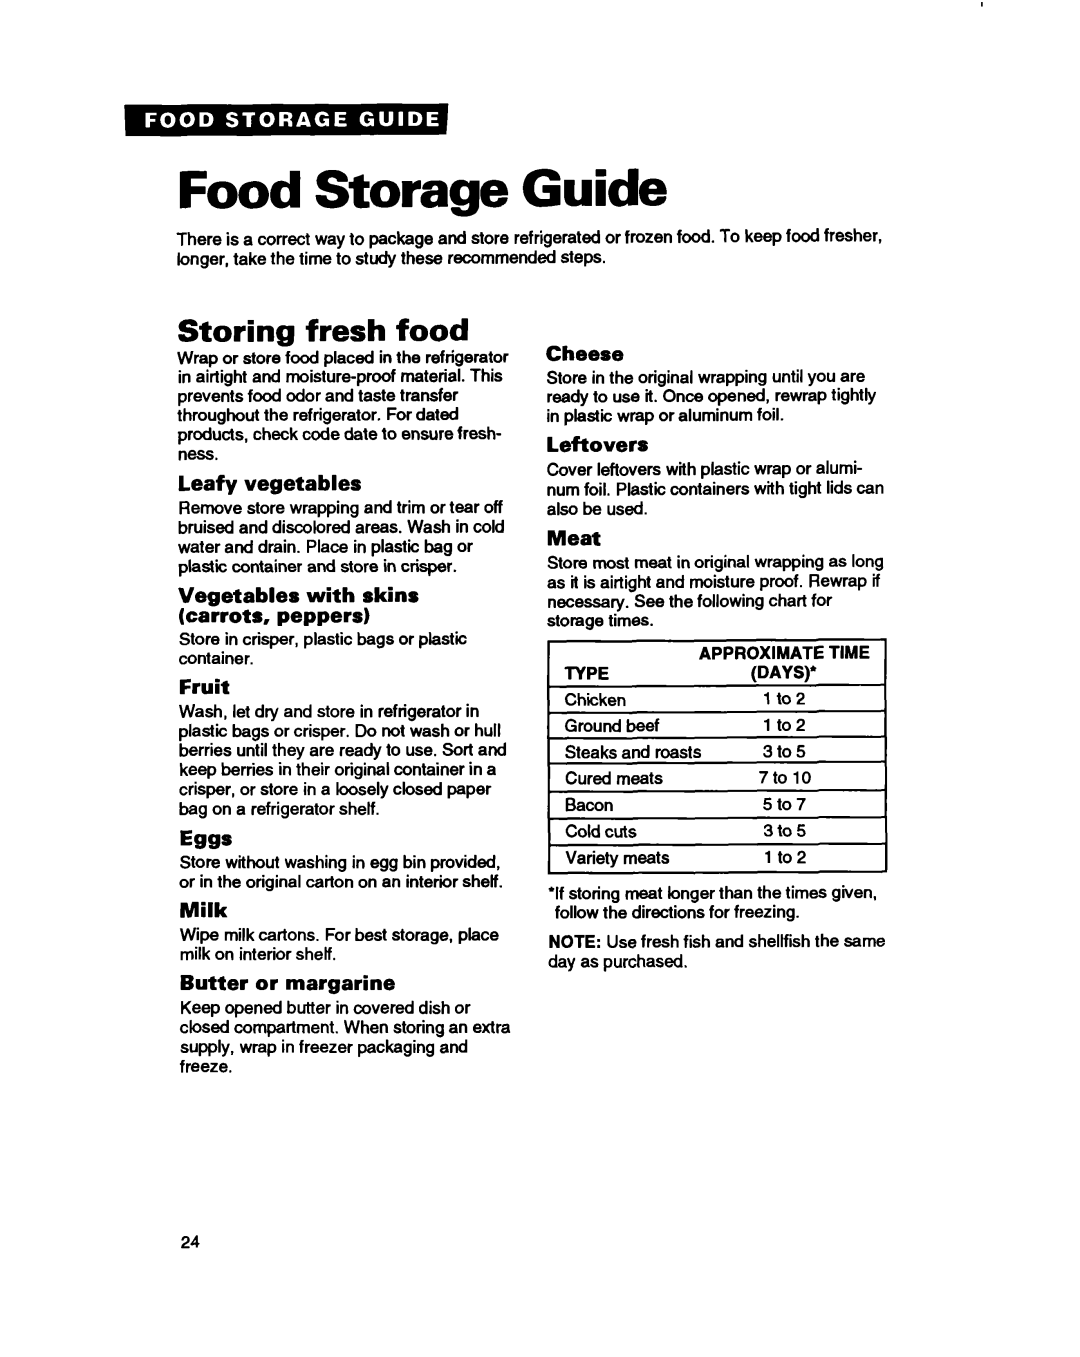 Whirlpool ED22DC Food Storage Guide, Storing fresh food, Leafy vegetables, Vegetables with skins carrots, peppers, Fruit 